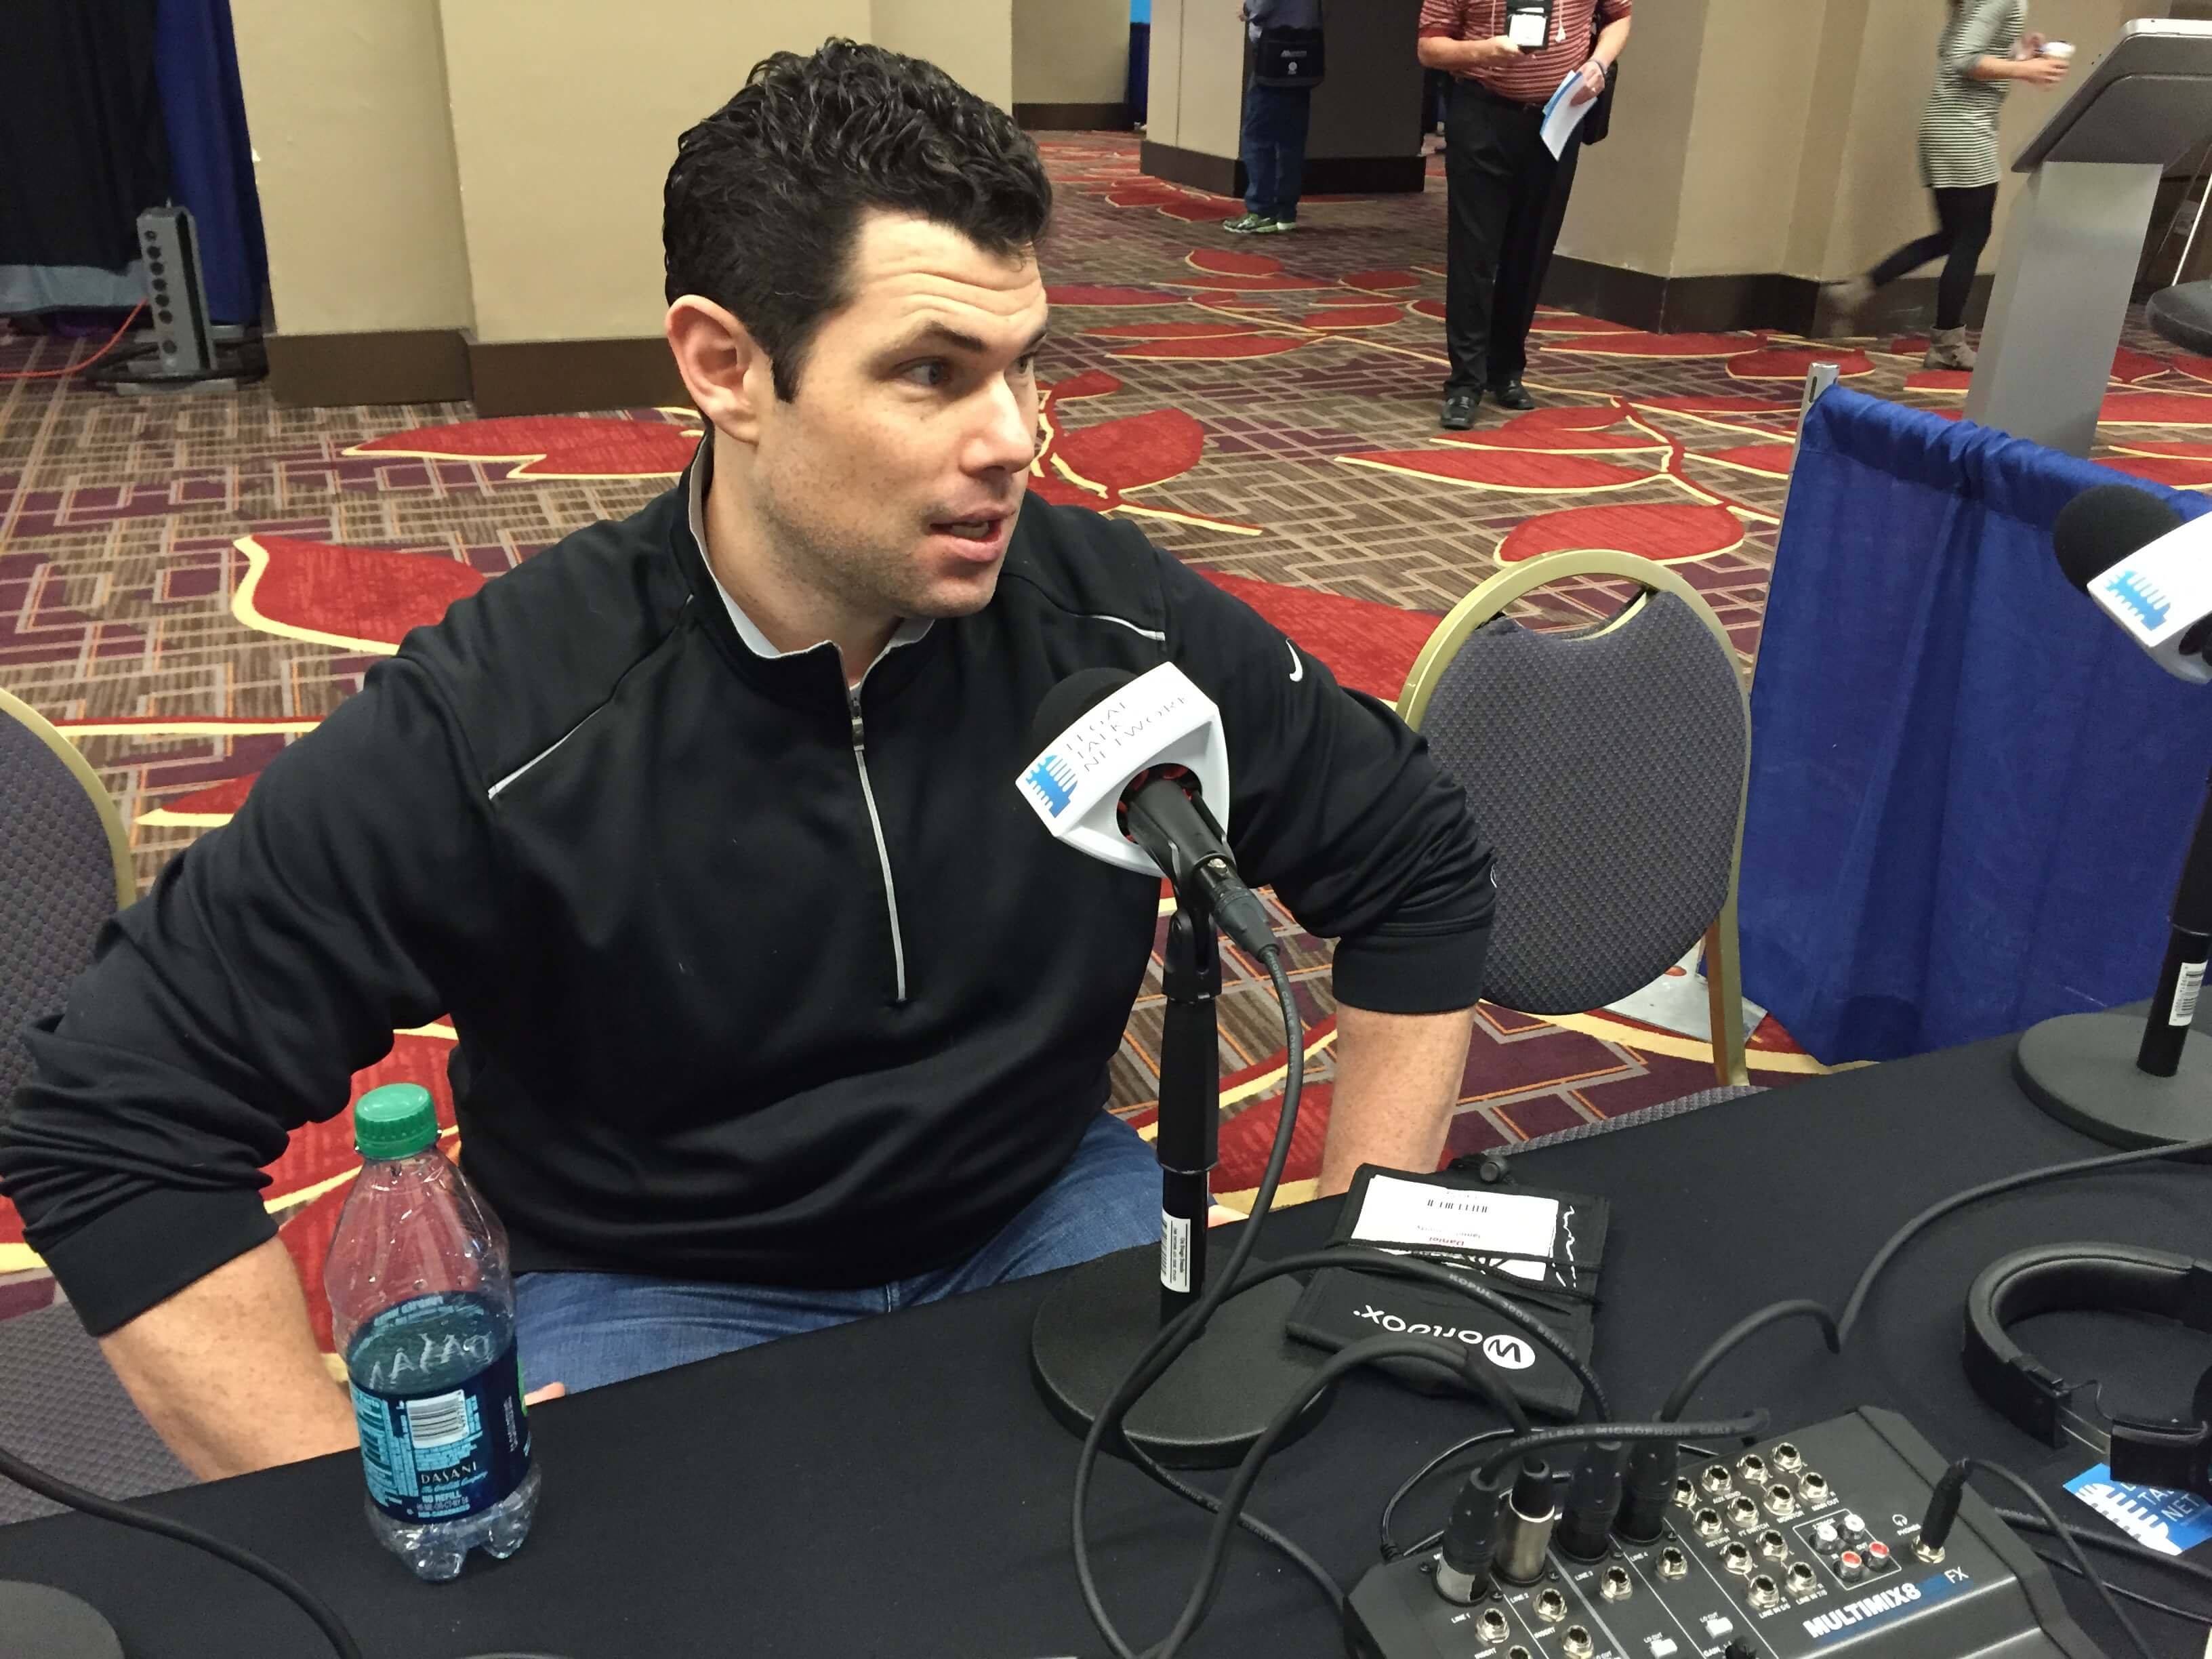 Casey Flaherty interview with Legal Talk Network at 2015 ABA TECHSHOW